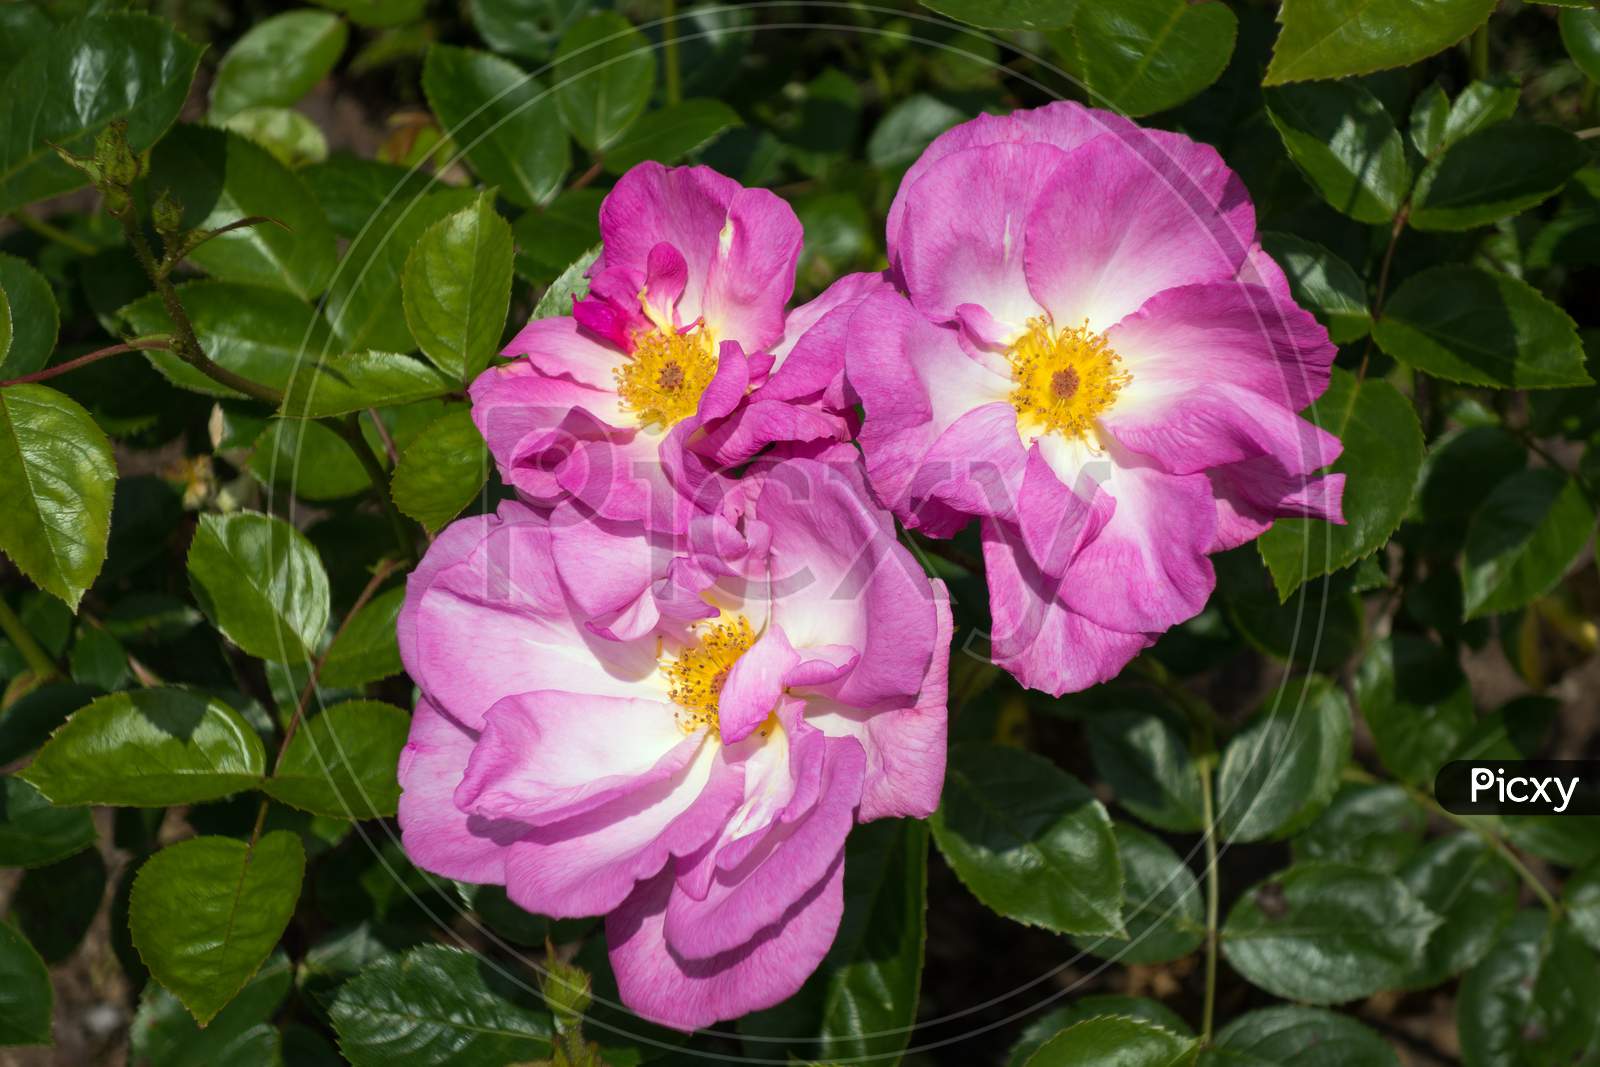 Cultivated Ornamental Dog Rose Flowering In A Garden In Kent